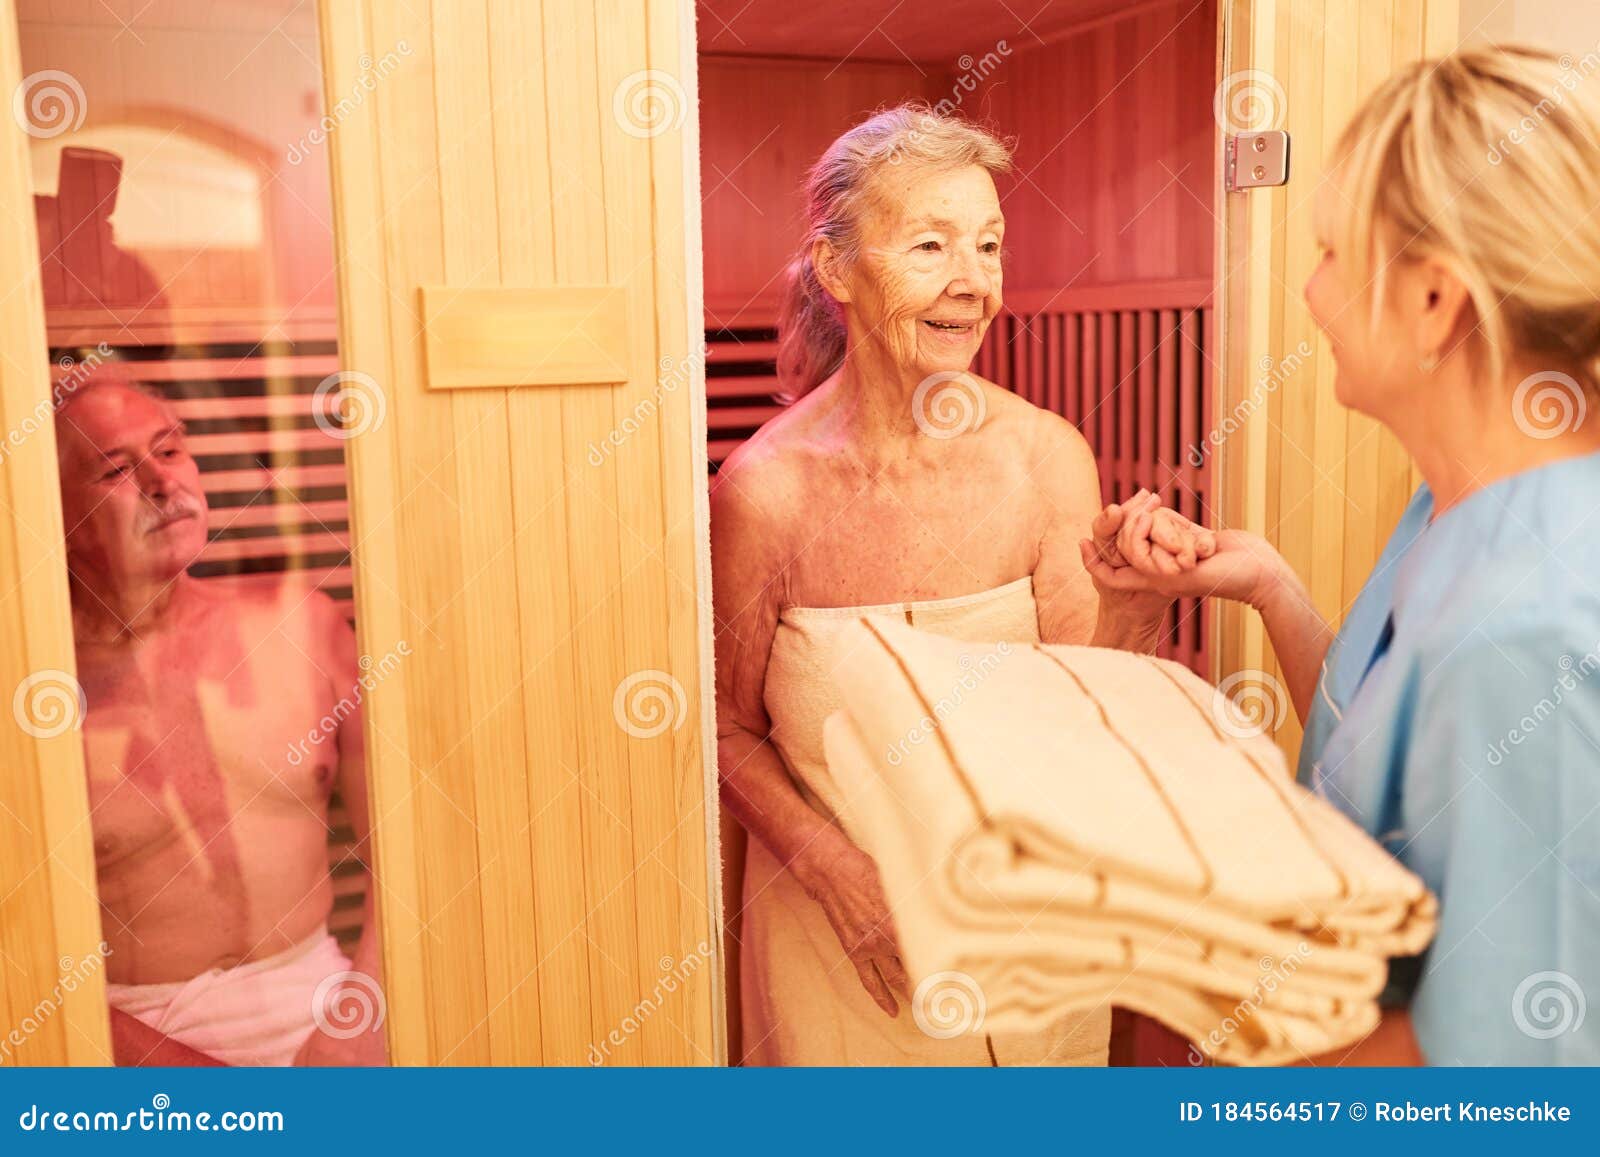 Seniors Are Cared For In The Sauna Stock Image Image Of Steam Retiree 184564517